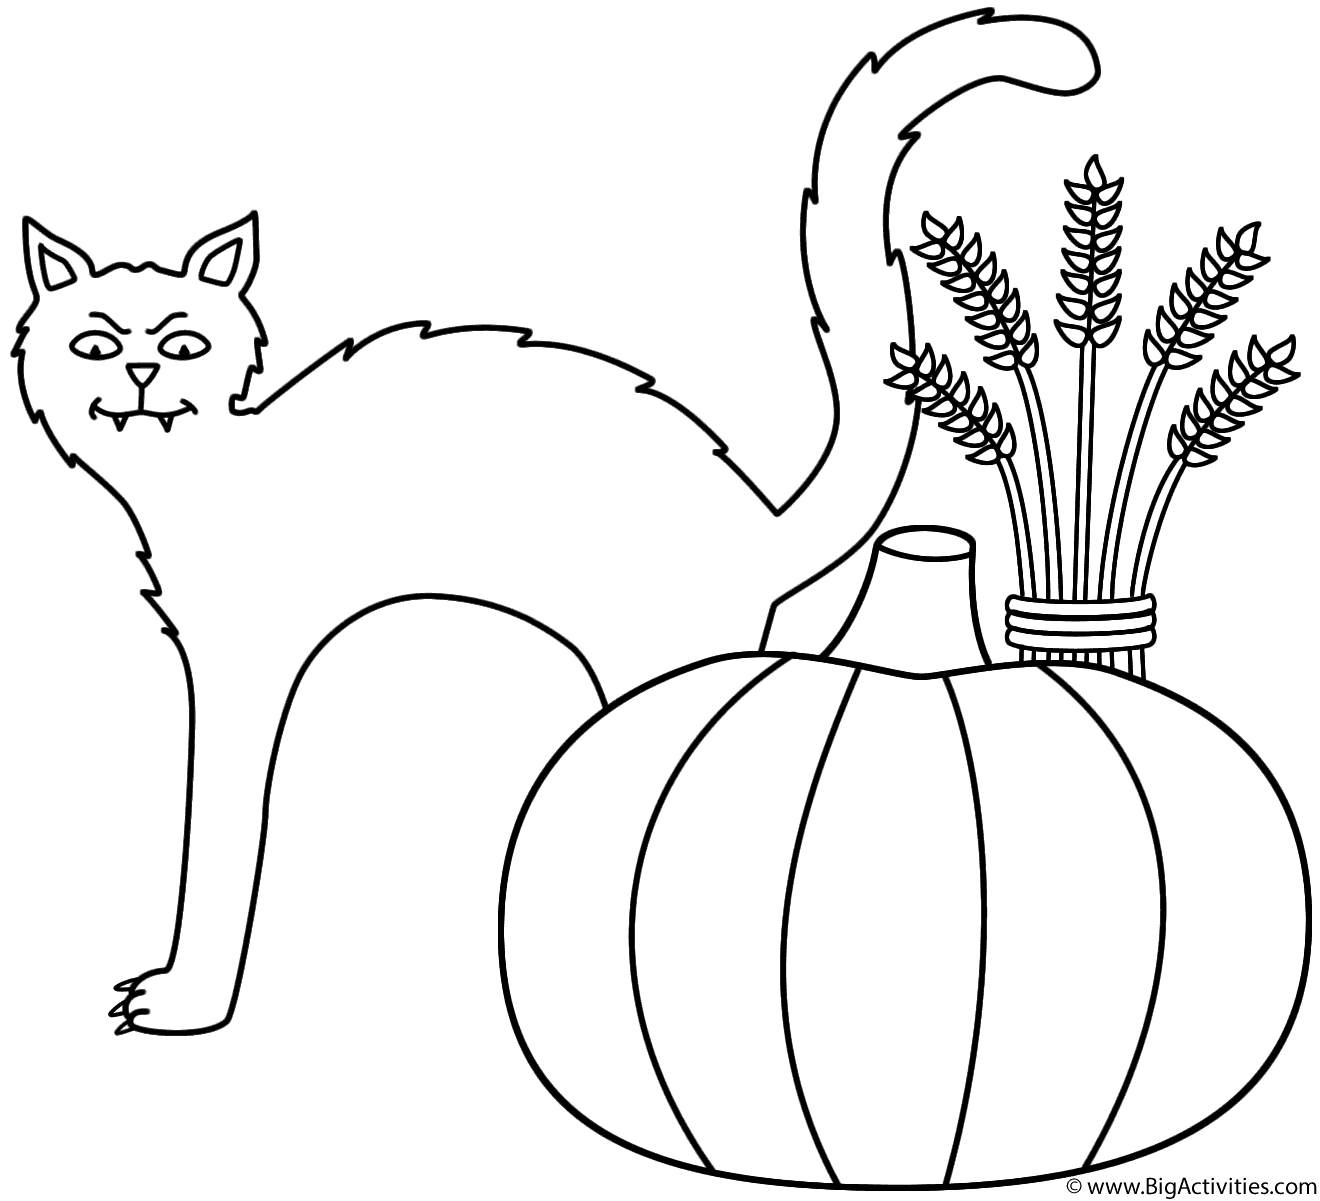 Download Black cat with pumpkin and wheat sheaf - Coloring Page ...